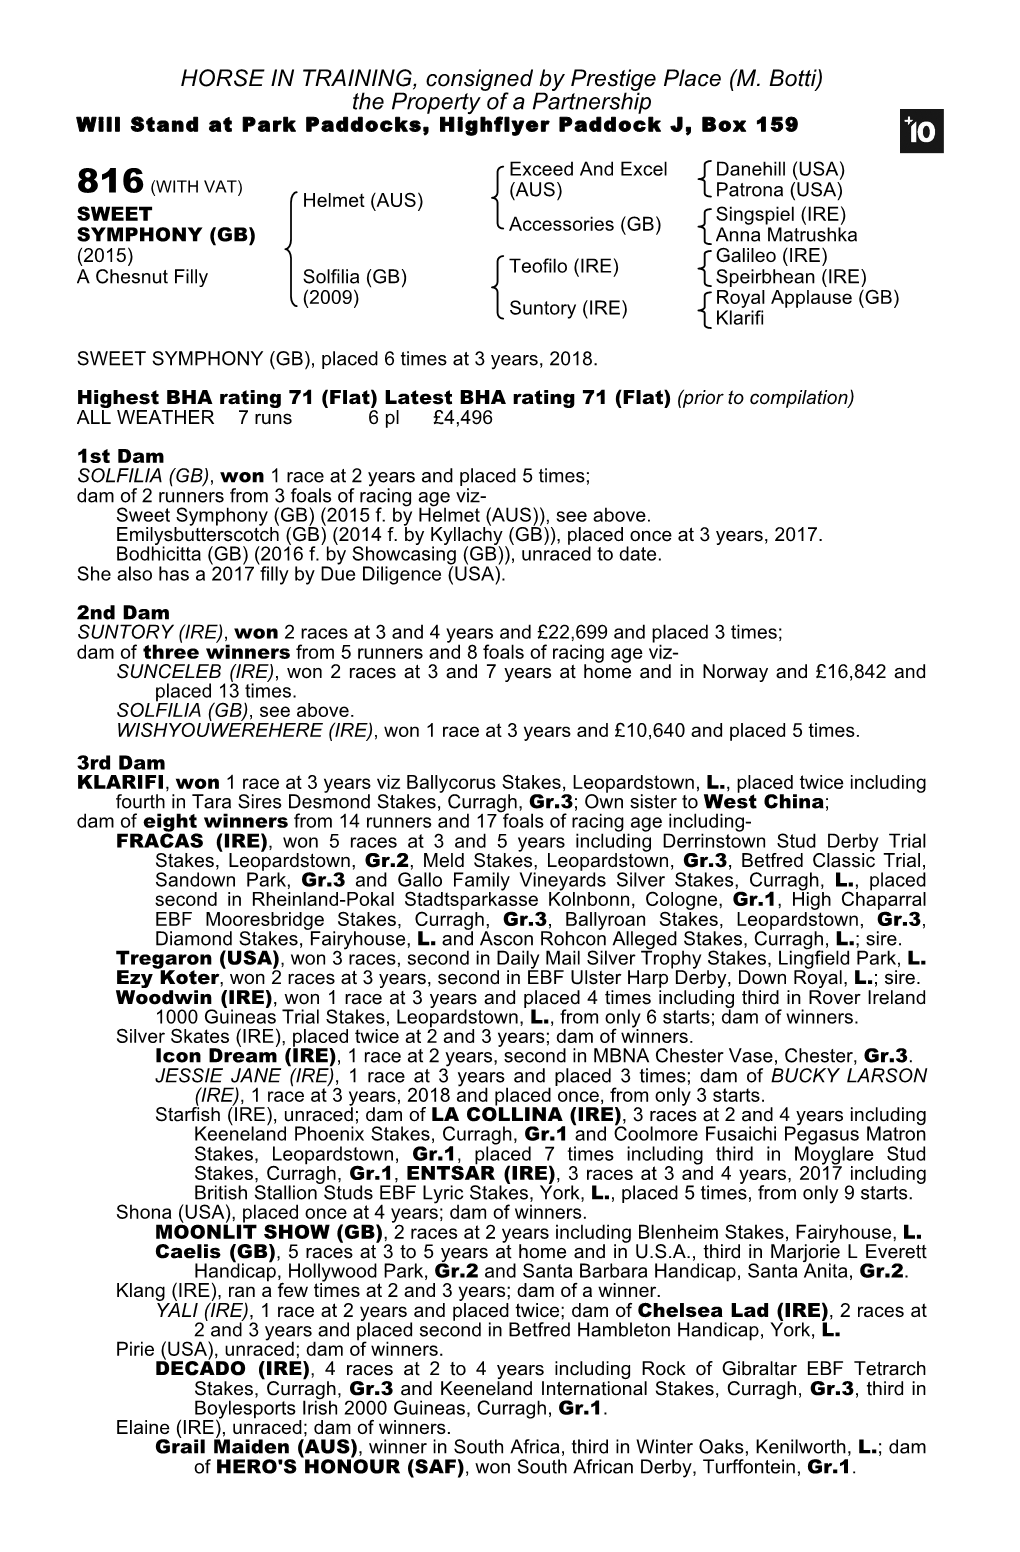 HORSE in TRAINING, Consigned by Prestige Place (M. Botti) the Property of a Partnership Will Stand at Park Paddocks, Highflyer Paddock J, Box 159